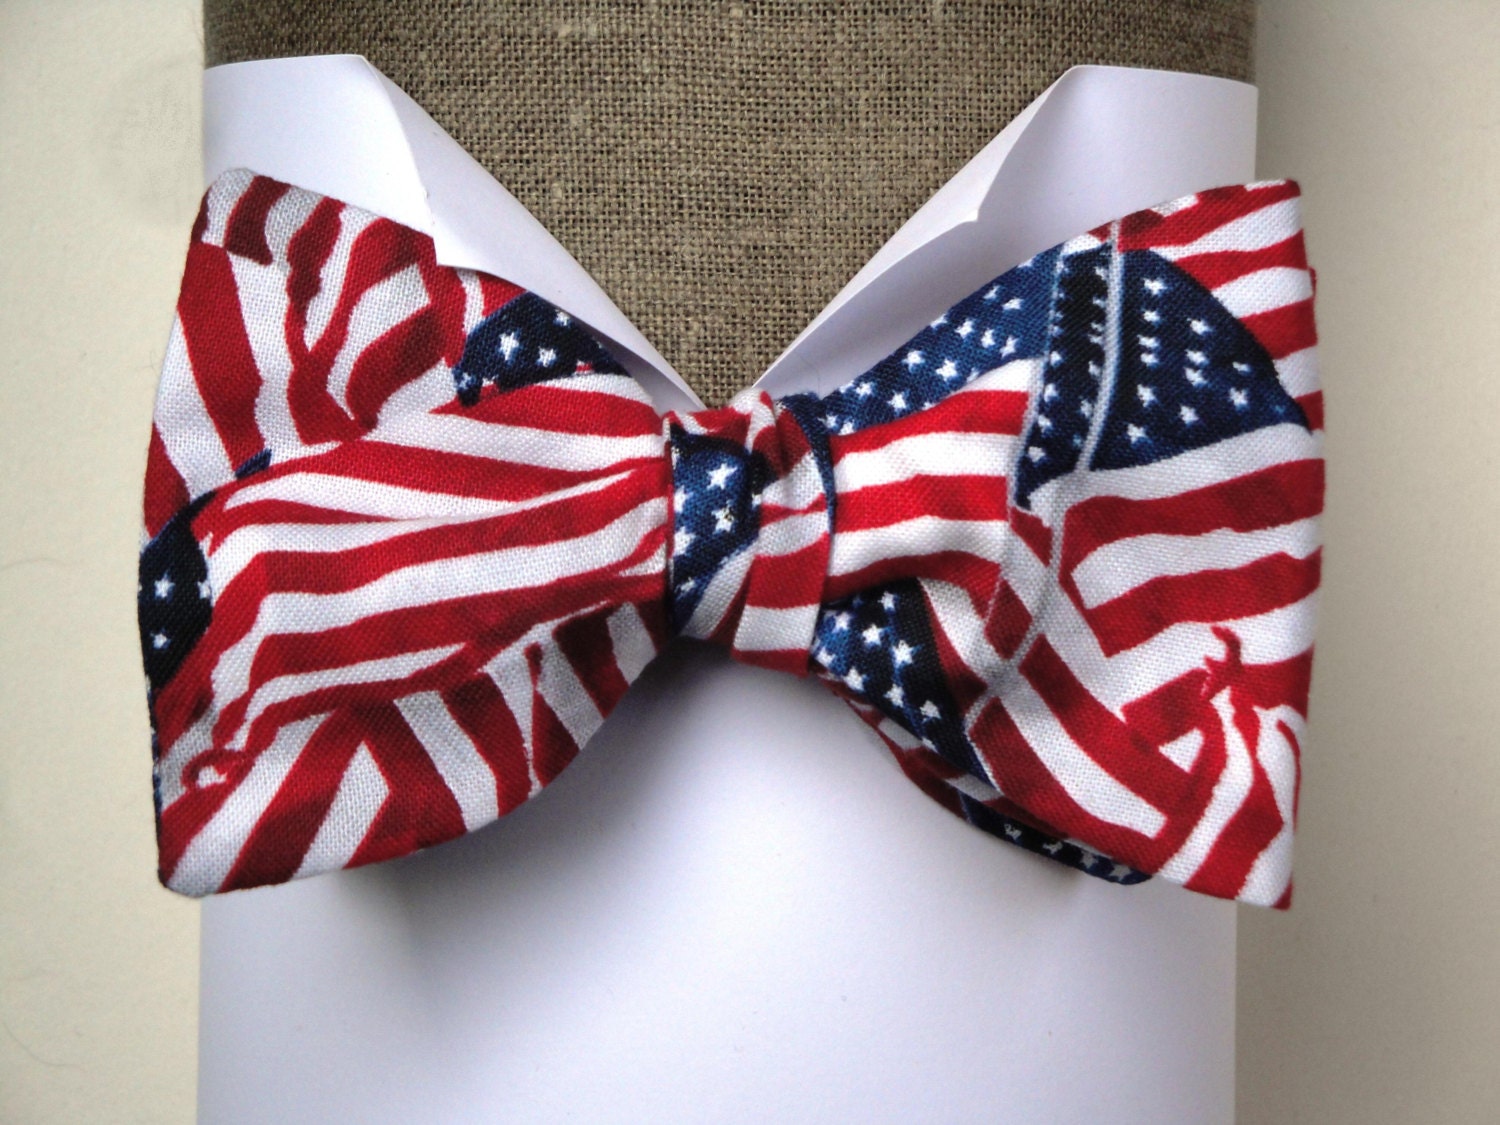 Bow Tie, US flags self tie or pre tied bow tie, bow ties for men.